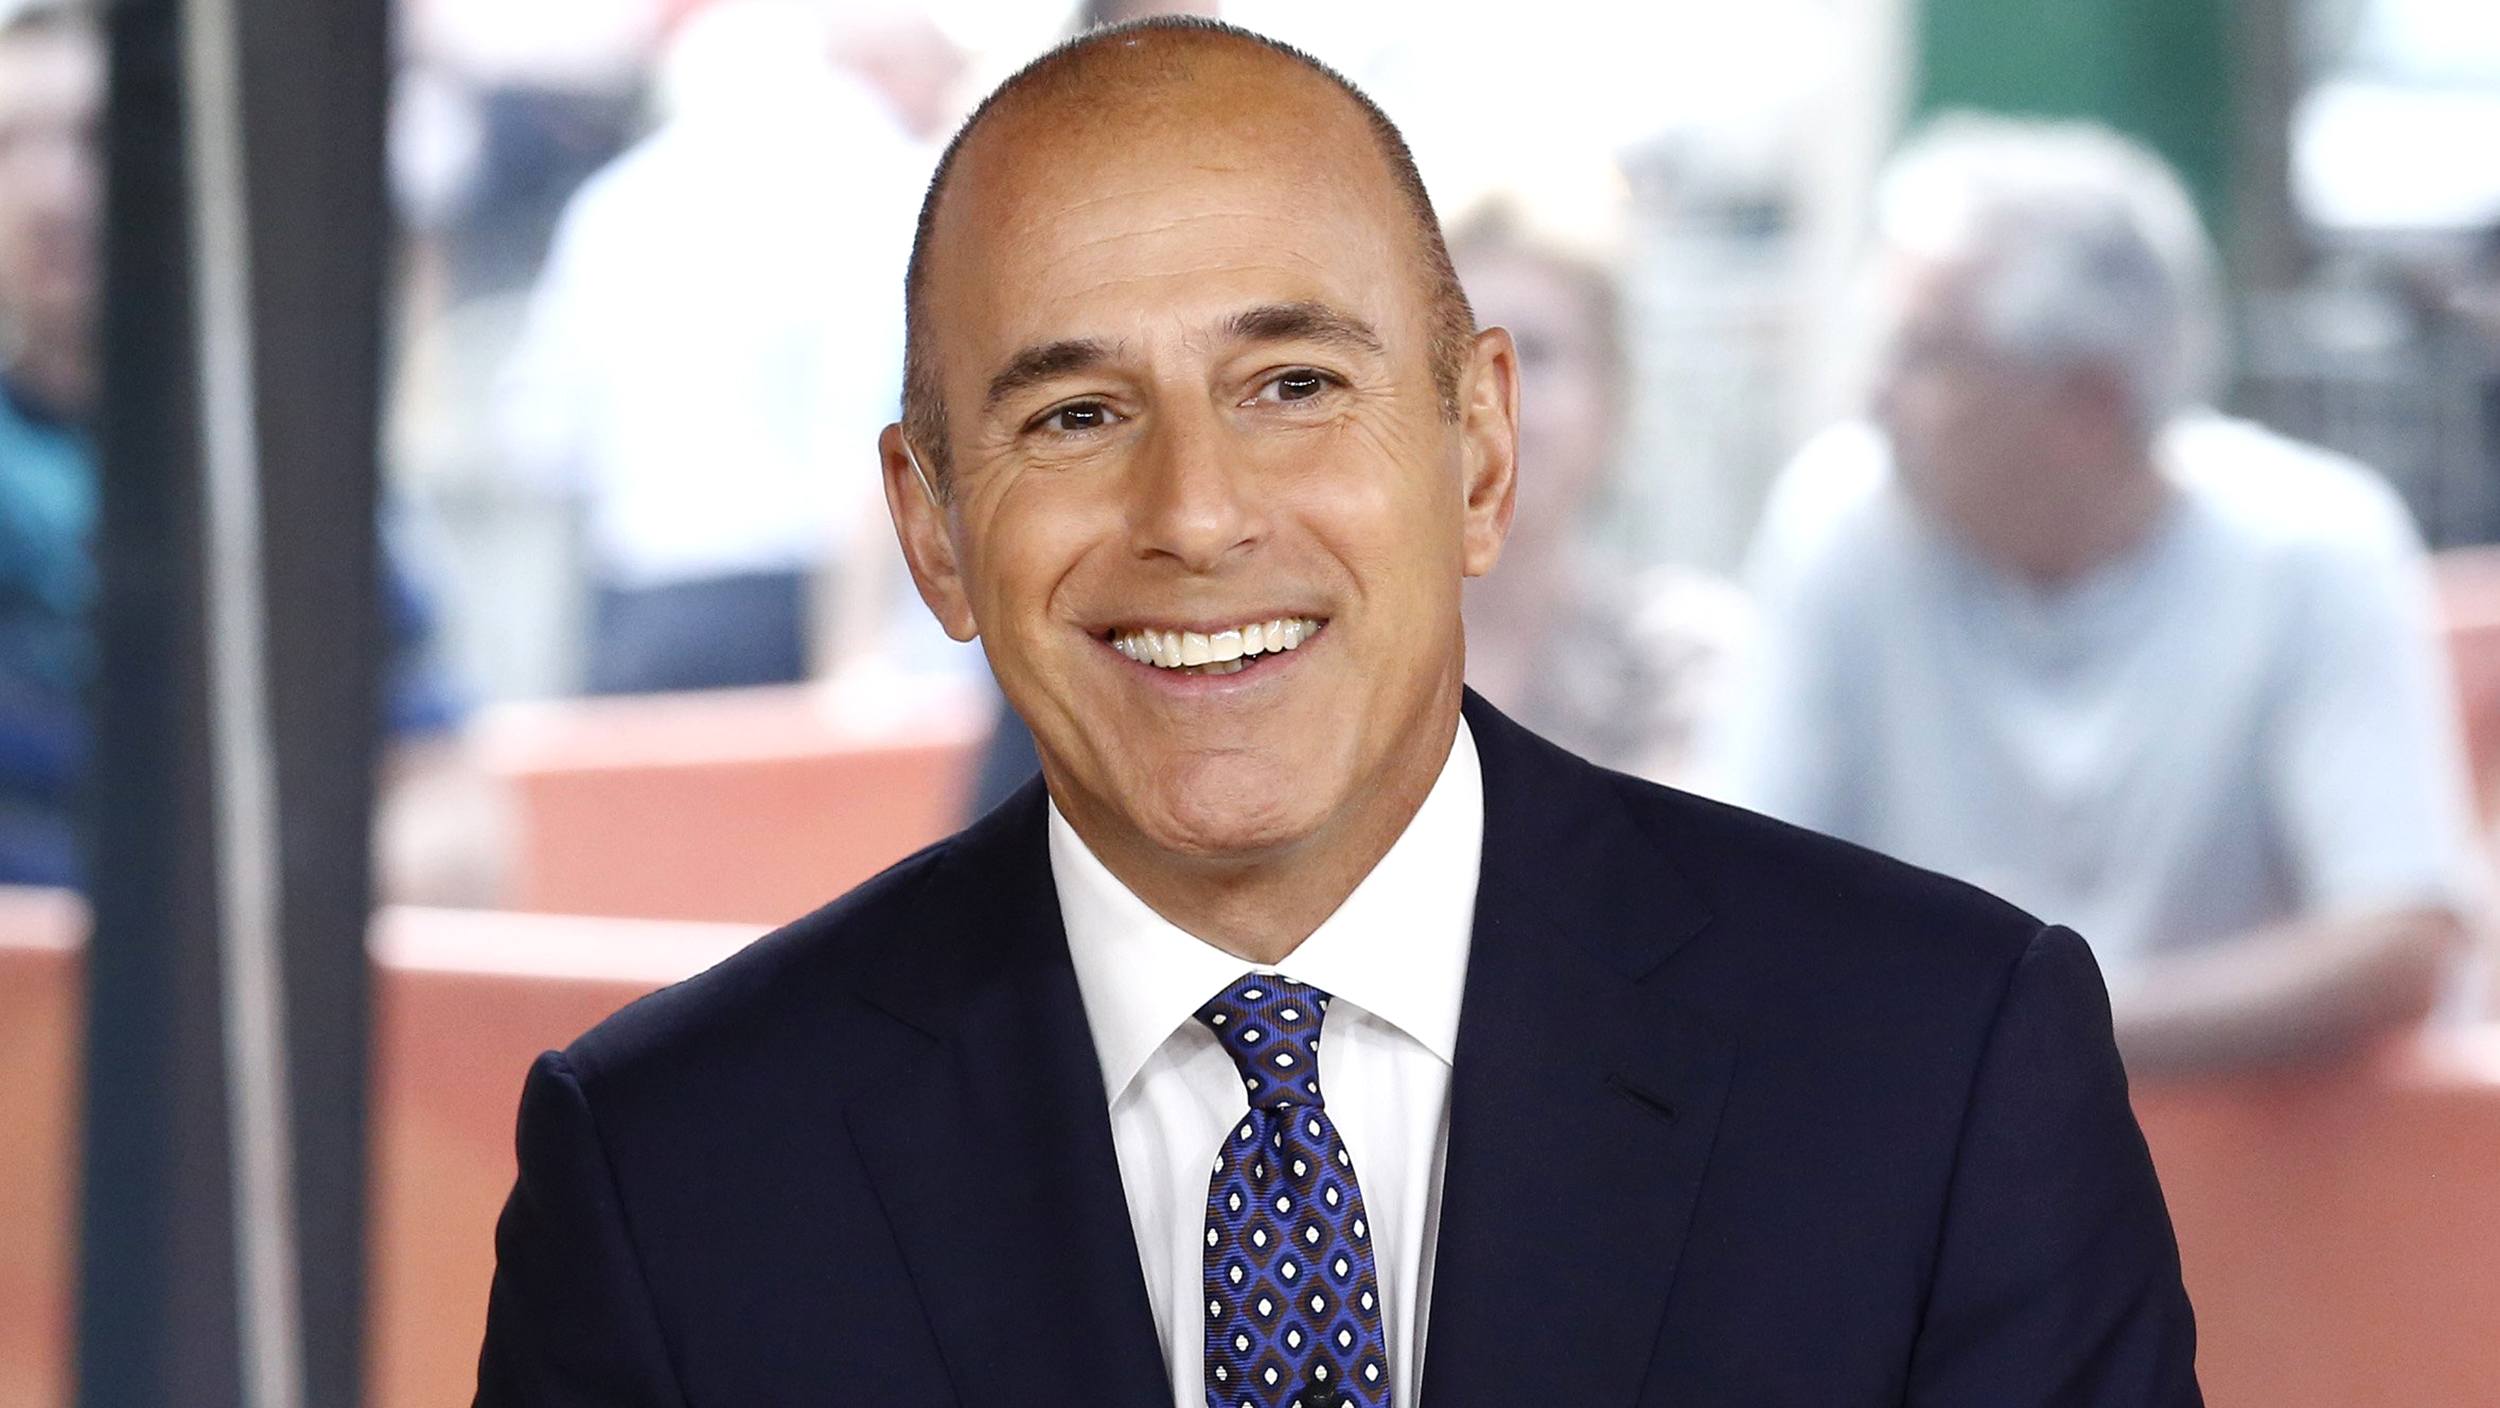 matt lauer smiles on set of Today in a dark suit and speckled tie